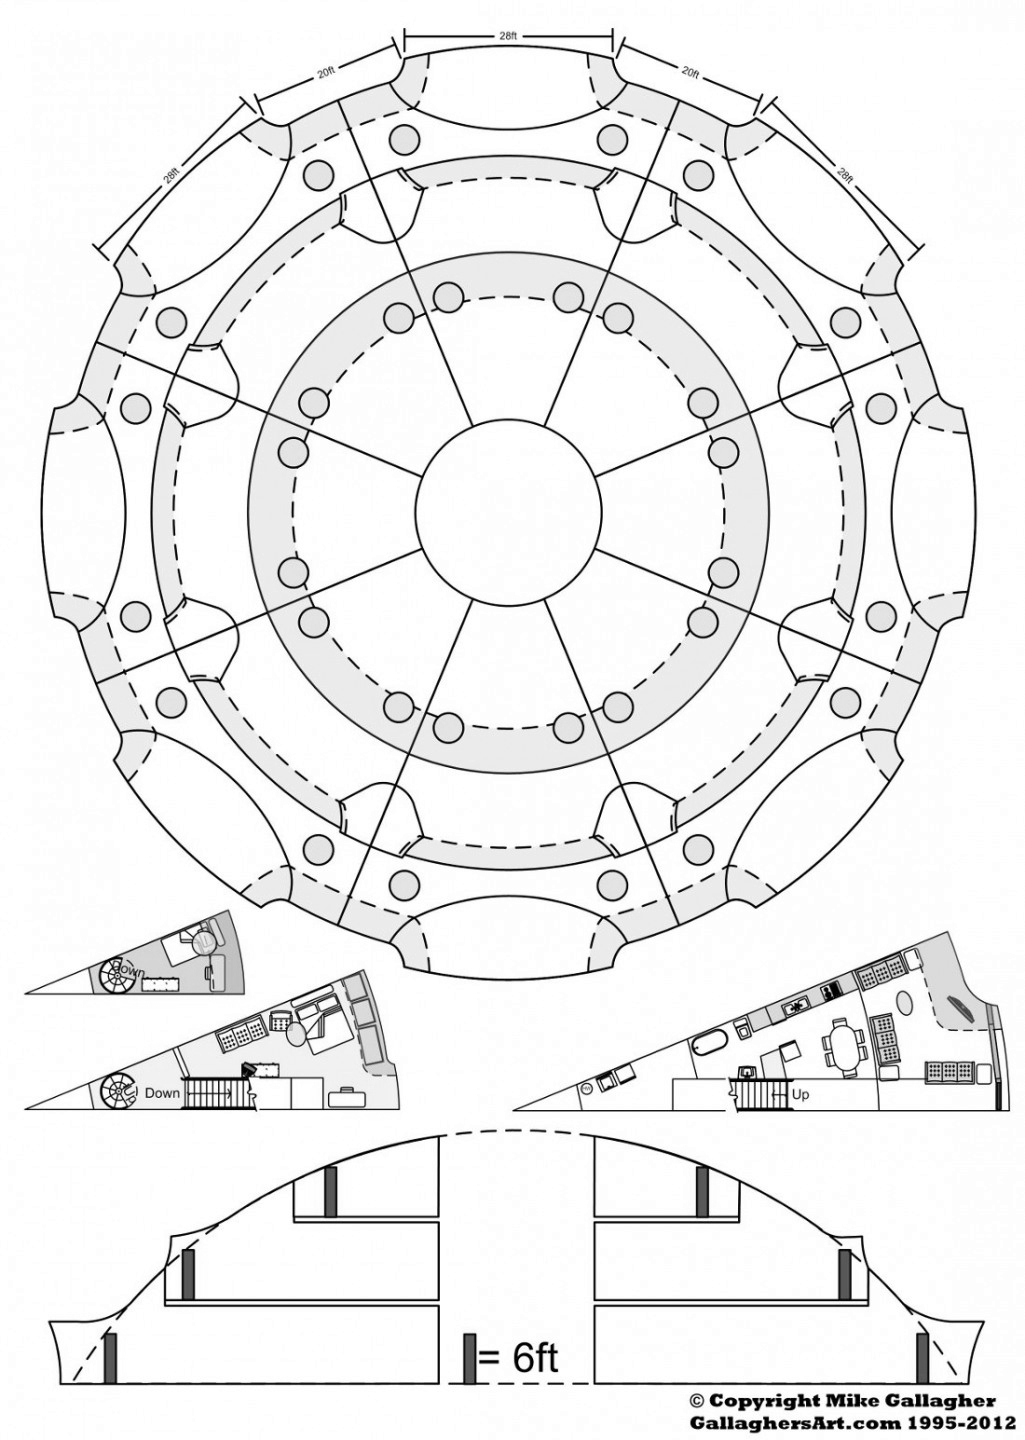 Layout of 8 separate housing areas from 3rd Floor for Dome GallaghersArt_40m_Circle_01sm.jpg - Layout of 8 separate housing areas with just over 3,000sq feet of space each. If needed they could be split in half for single room apartments. (single room floor layout shown). Center area could be open to air, and used as a community space. All uti